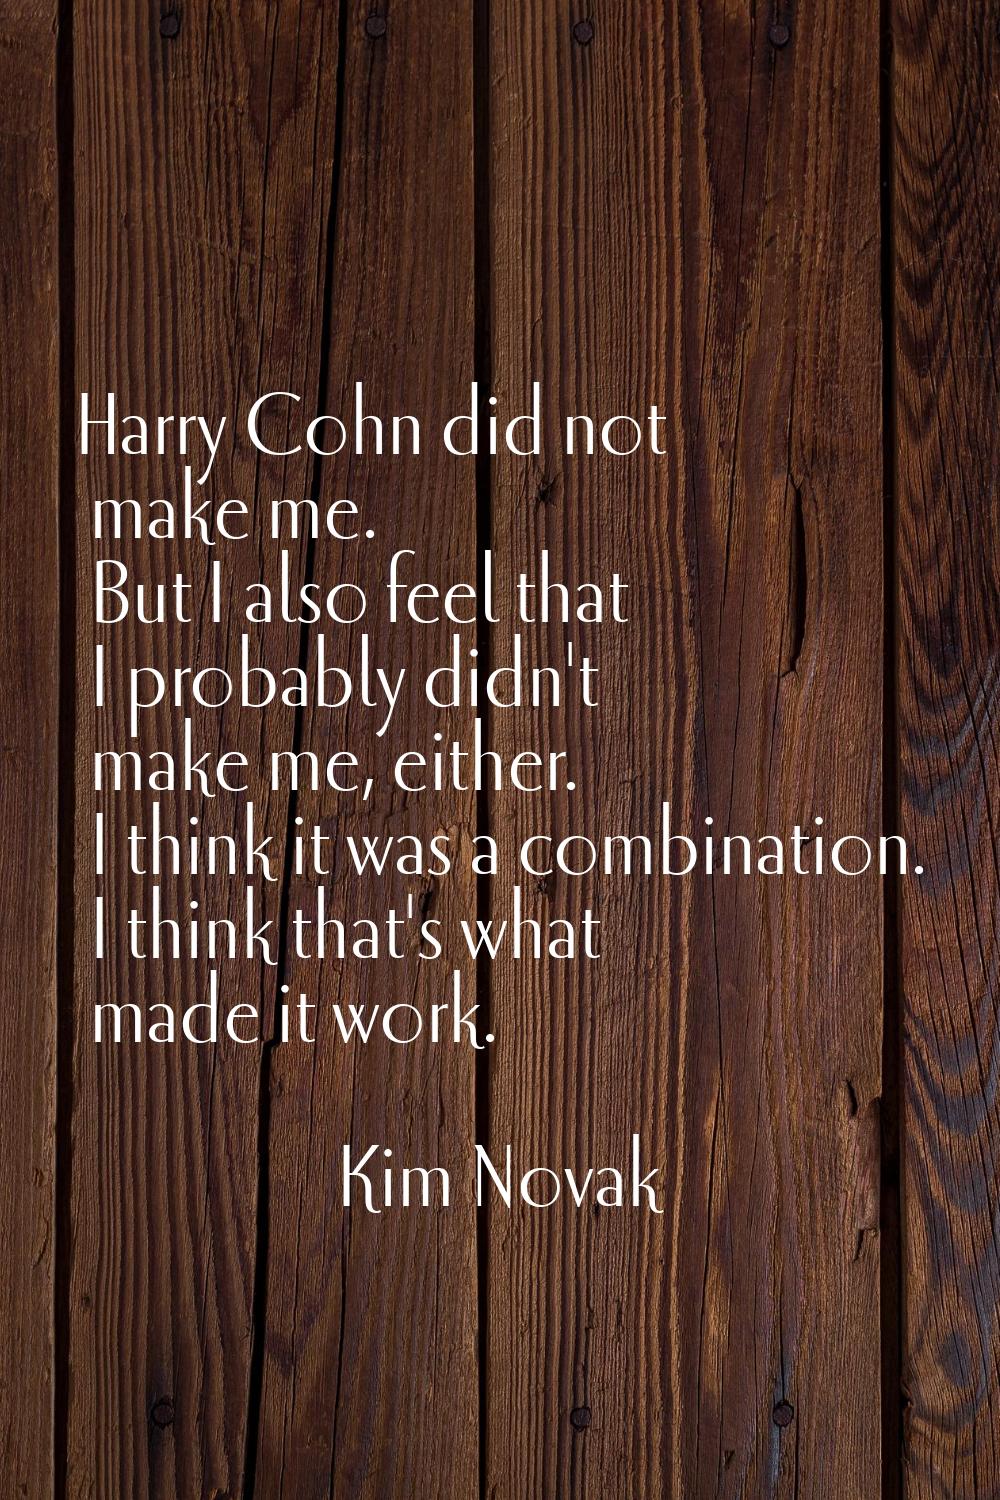 Harry Cohn did not make me. But I also feel that I probably didn't make me, either. I think it was 